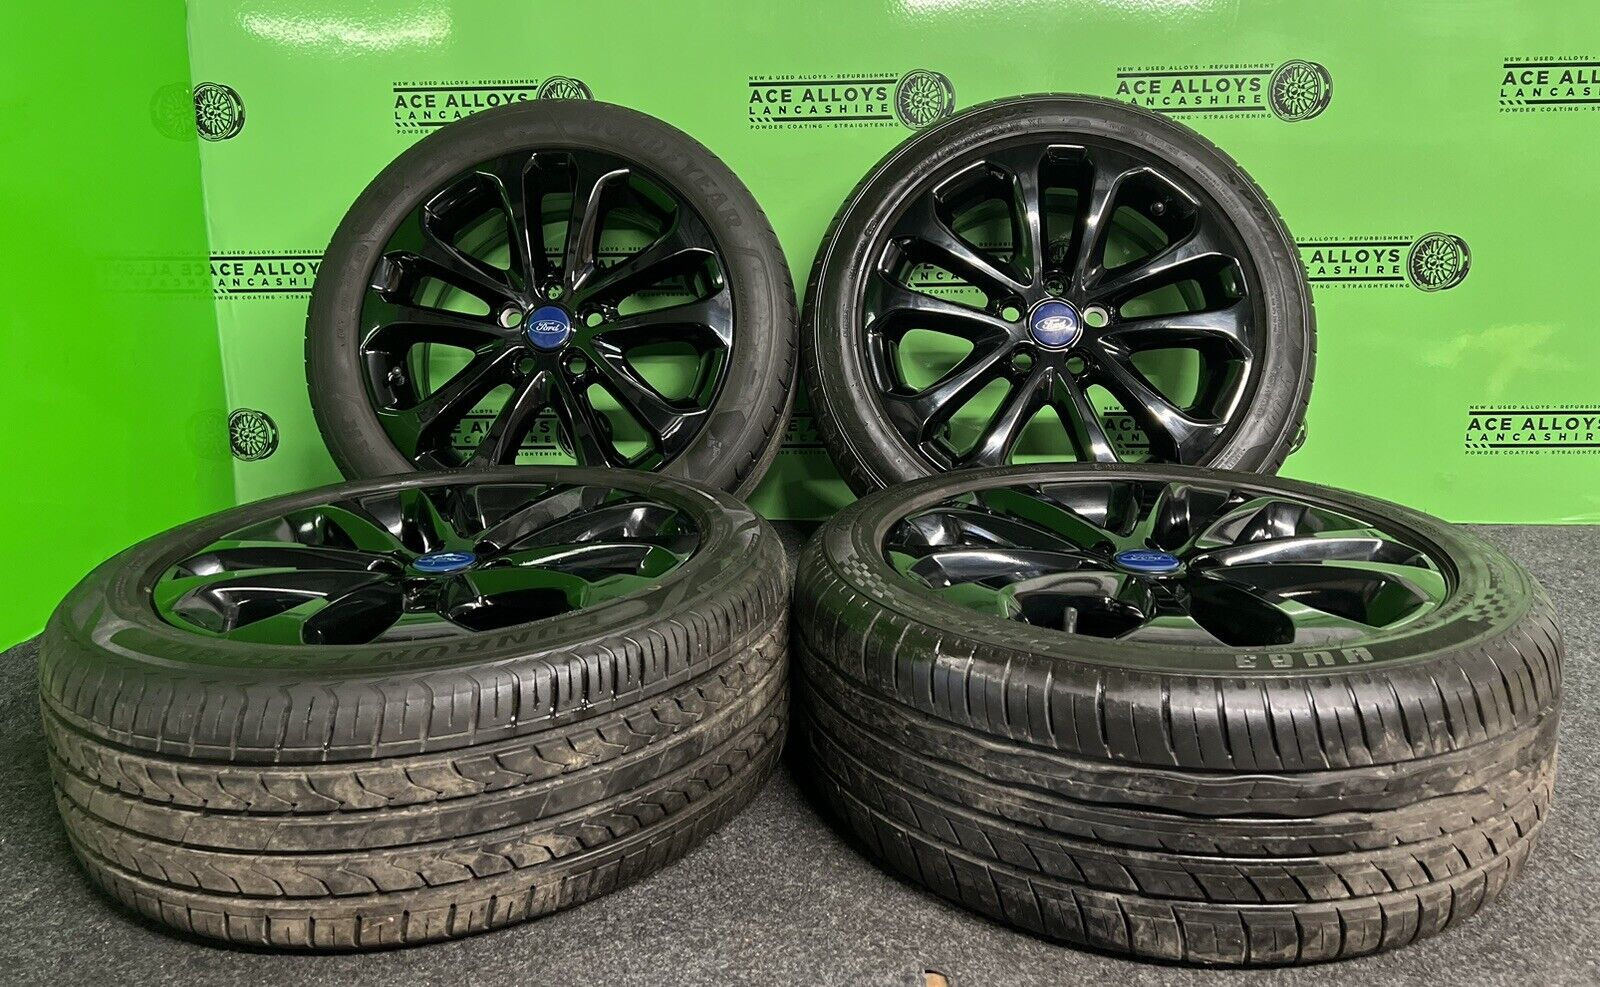 *REFURBISHED* FORD FOCUS MK2 17” 5x108 ALLOY WHEELS + TYRES CONNECT MONDEO